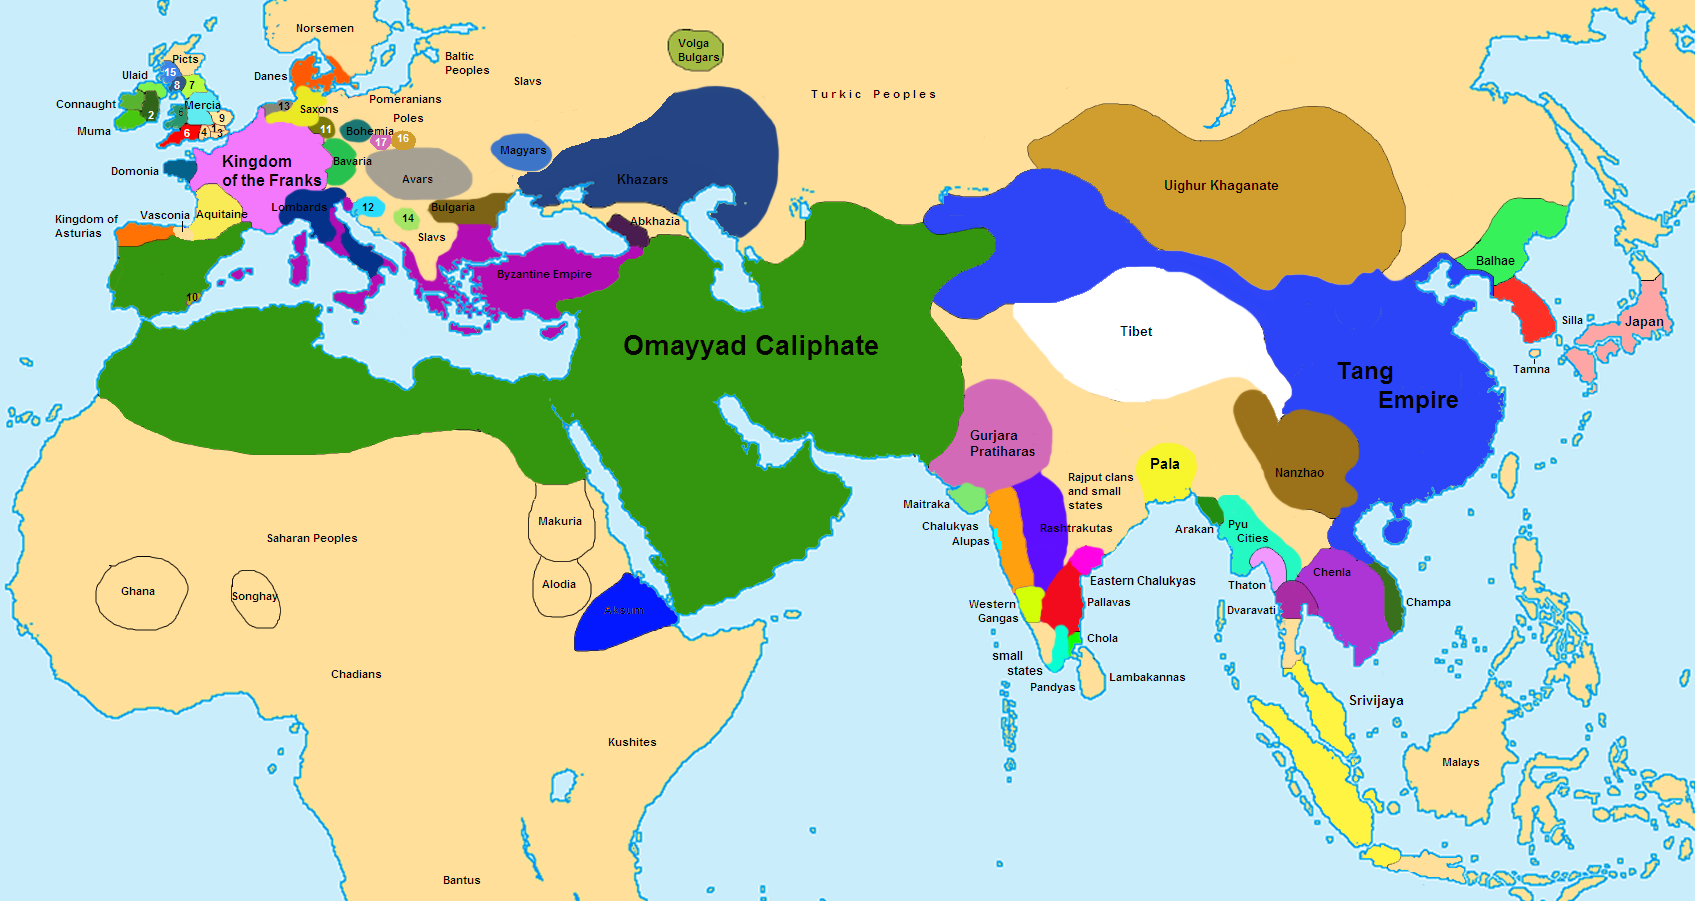 A map of the world at the Caliphate's height